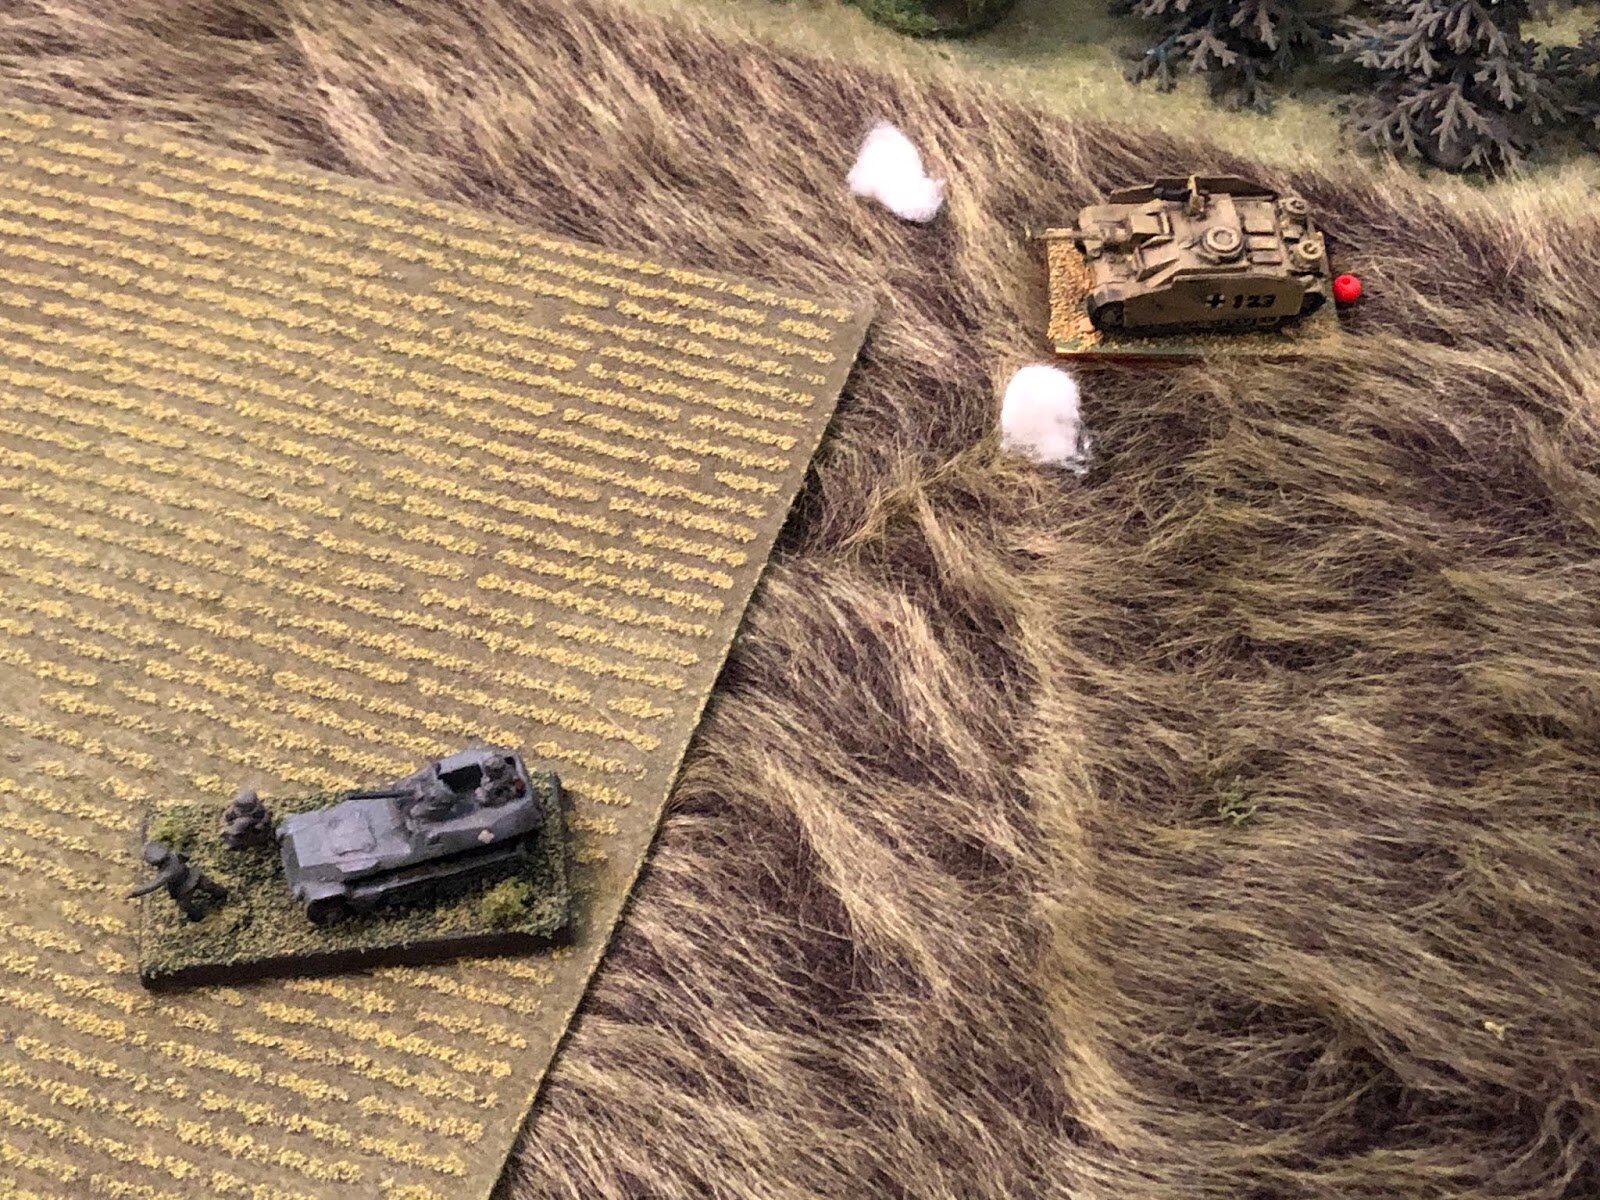  They don't spot the Marder (off camera to bottom left), so they both fire on the remaining Stug, though both miss, albeit close enough to shake up the crew. 